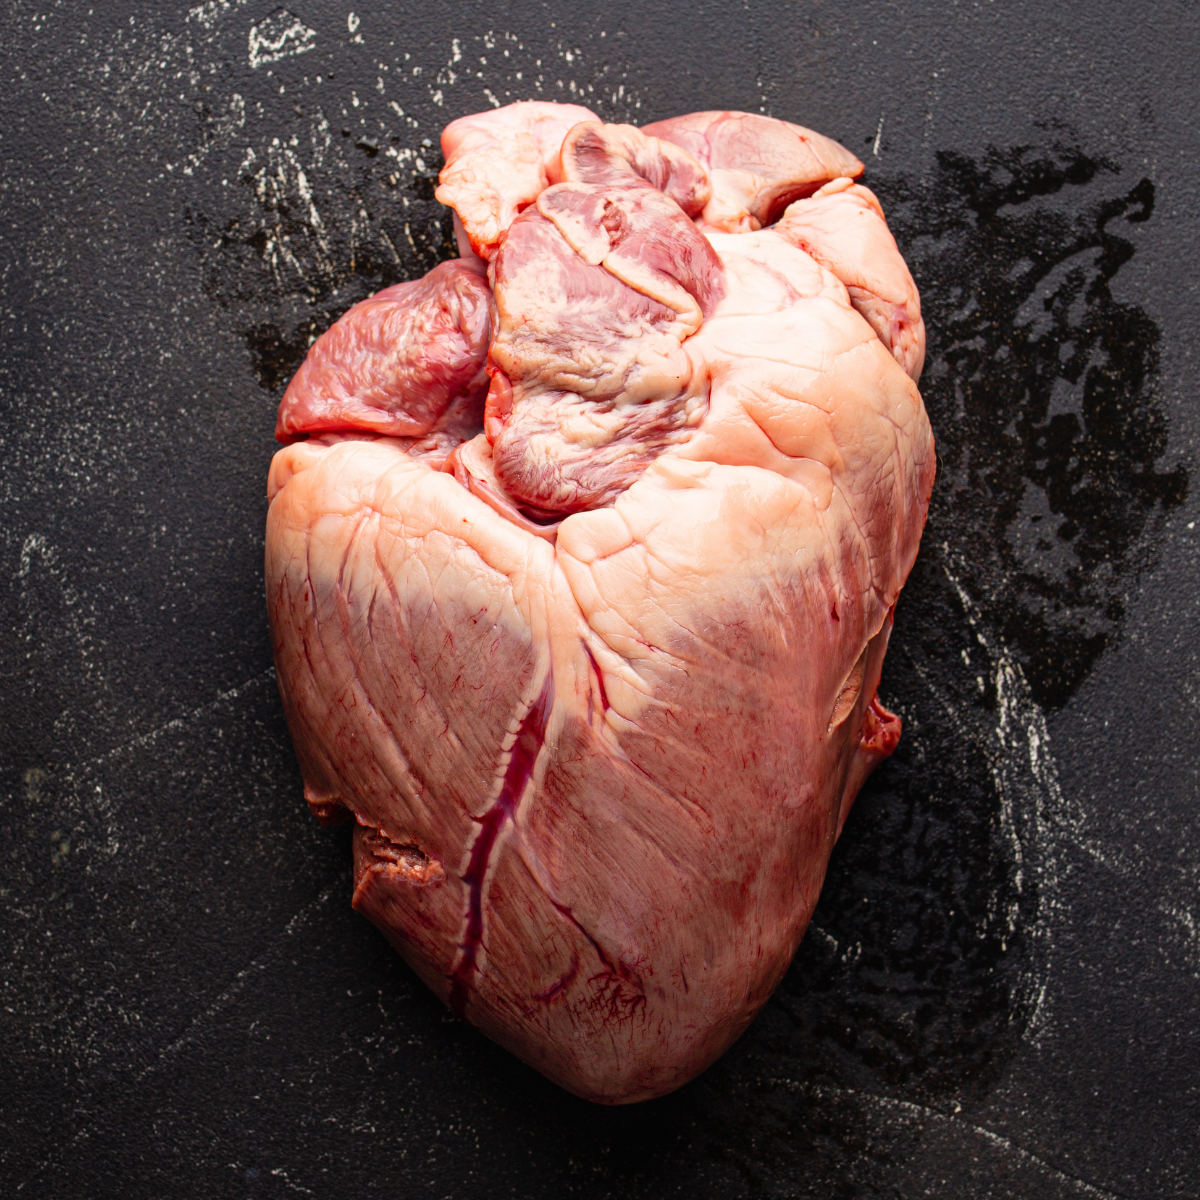 S5.08 Have a heart: the science of xenotransplantation